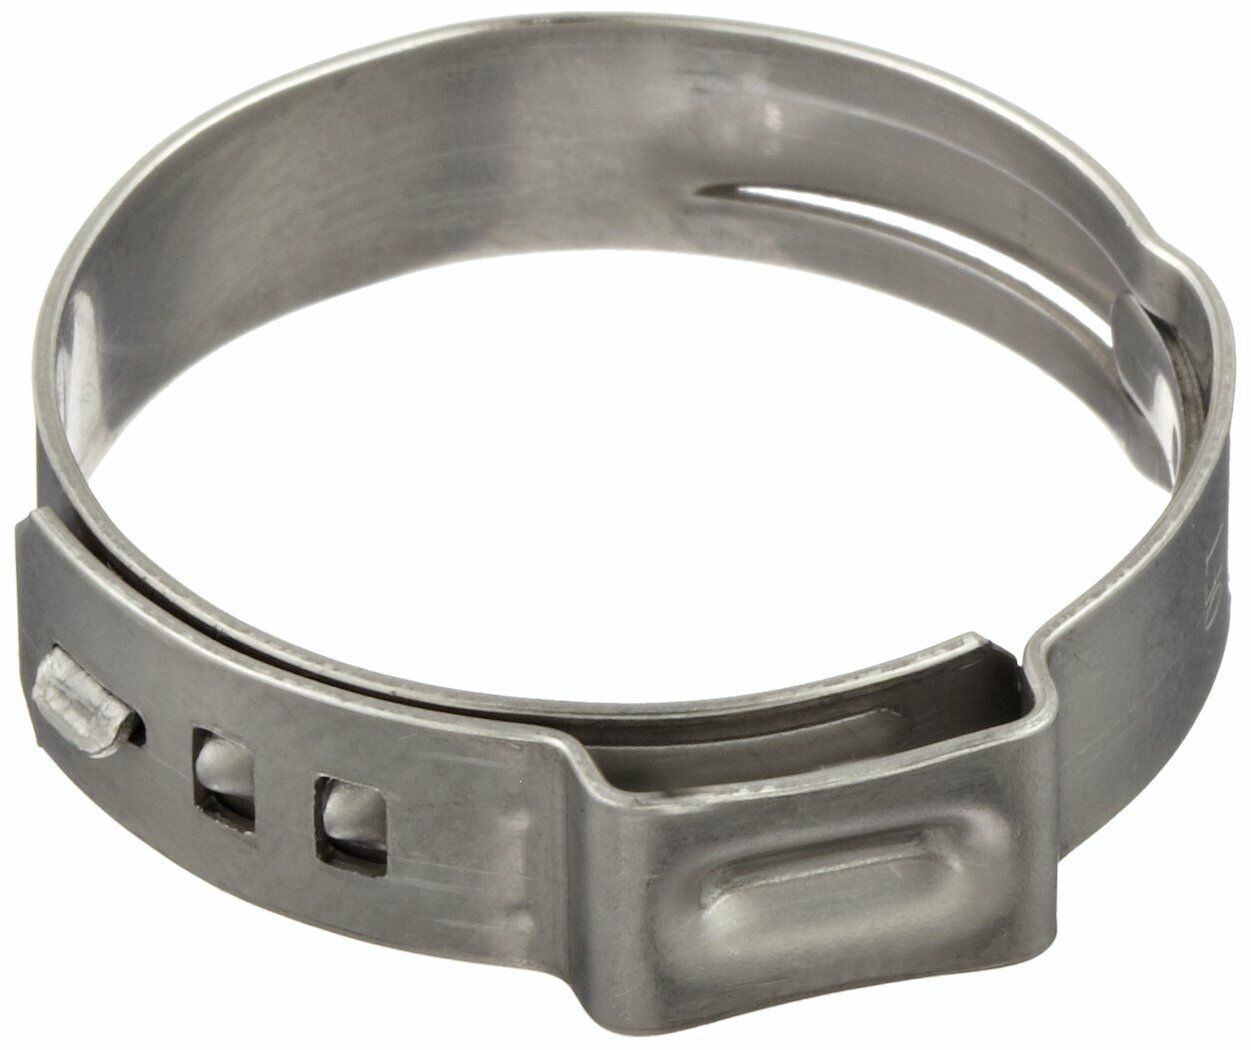 Stainless Steel Oetiker 1 Ear Stepless Marine Auto Crimp Clamp Ring, All Sizes